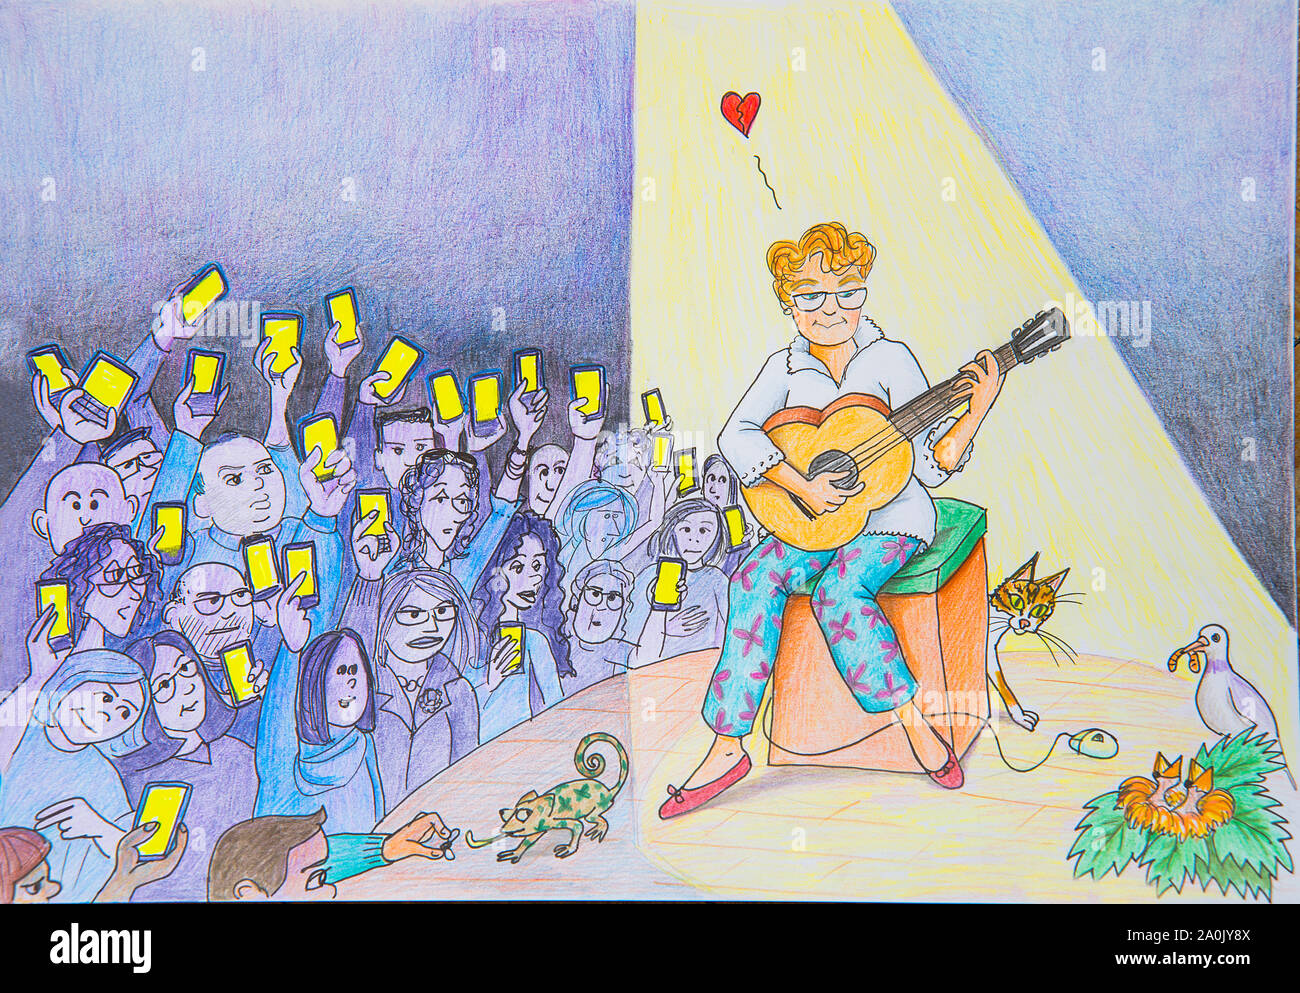 Woman giving a guitar concert. Illustration. Stock Photo